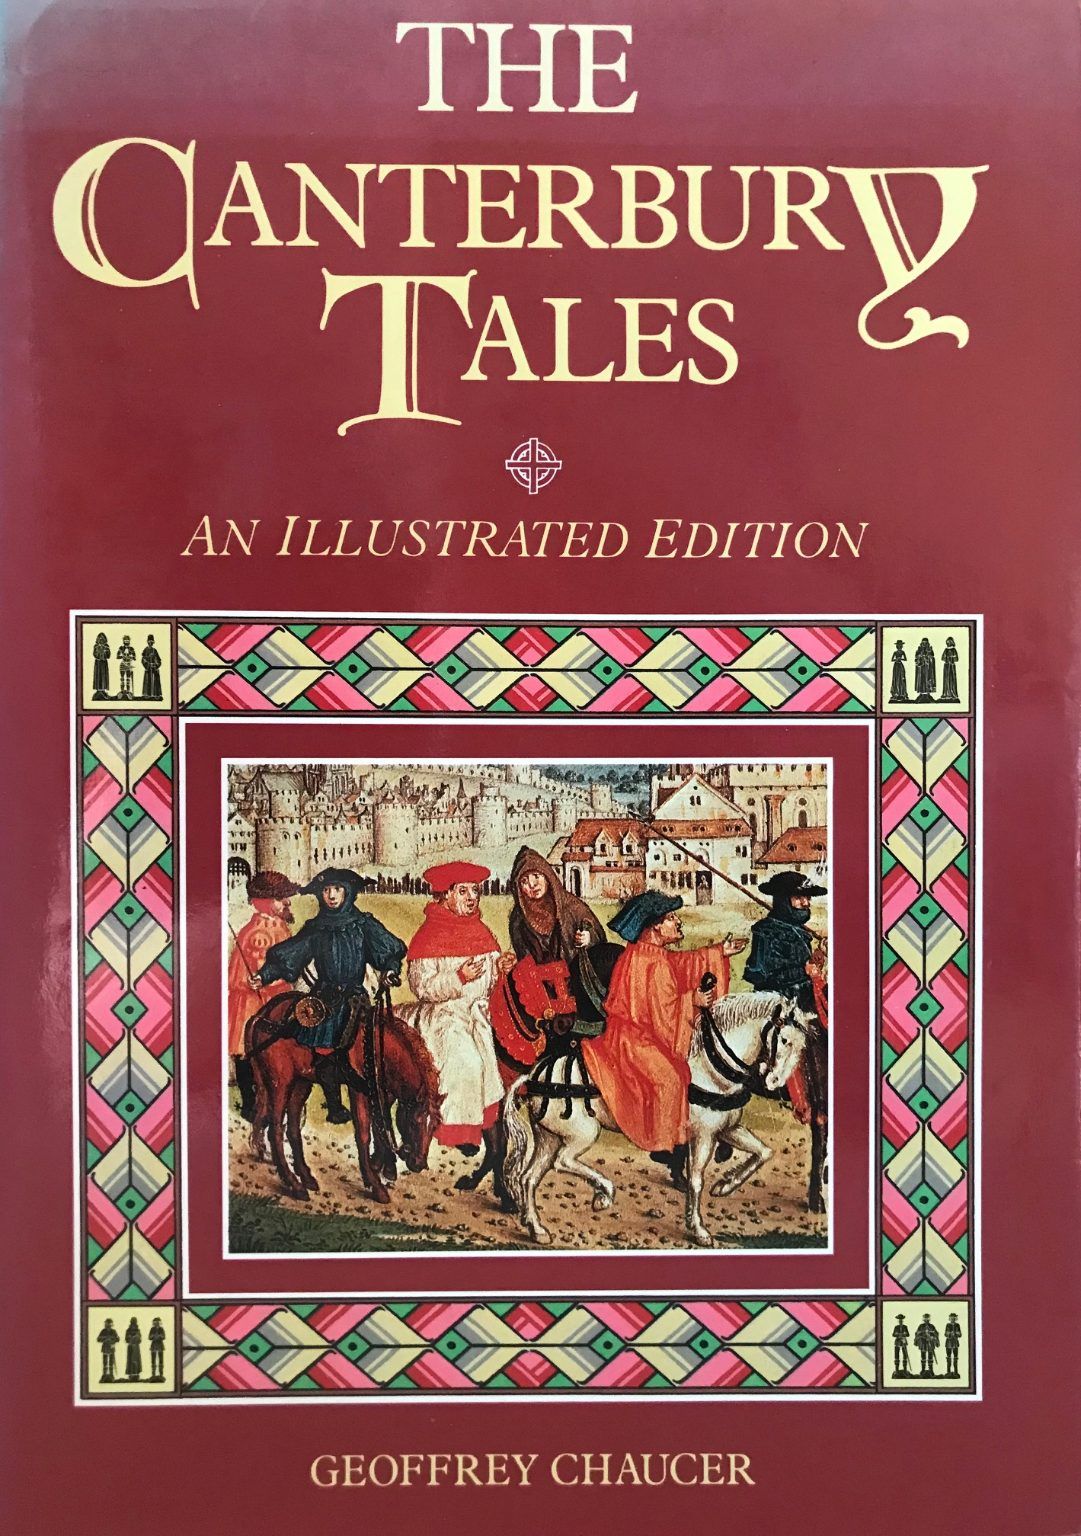 THE CANTERBURY TALES: An Illustrated Edition